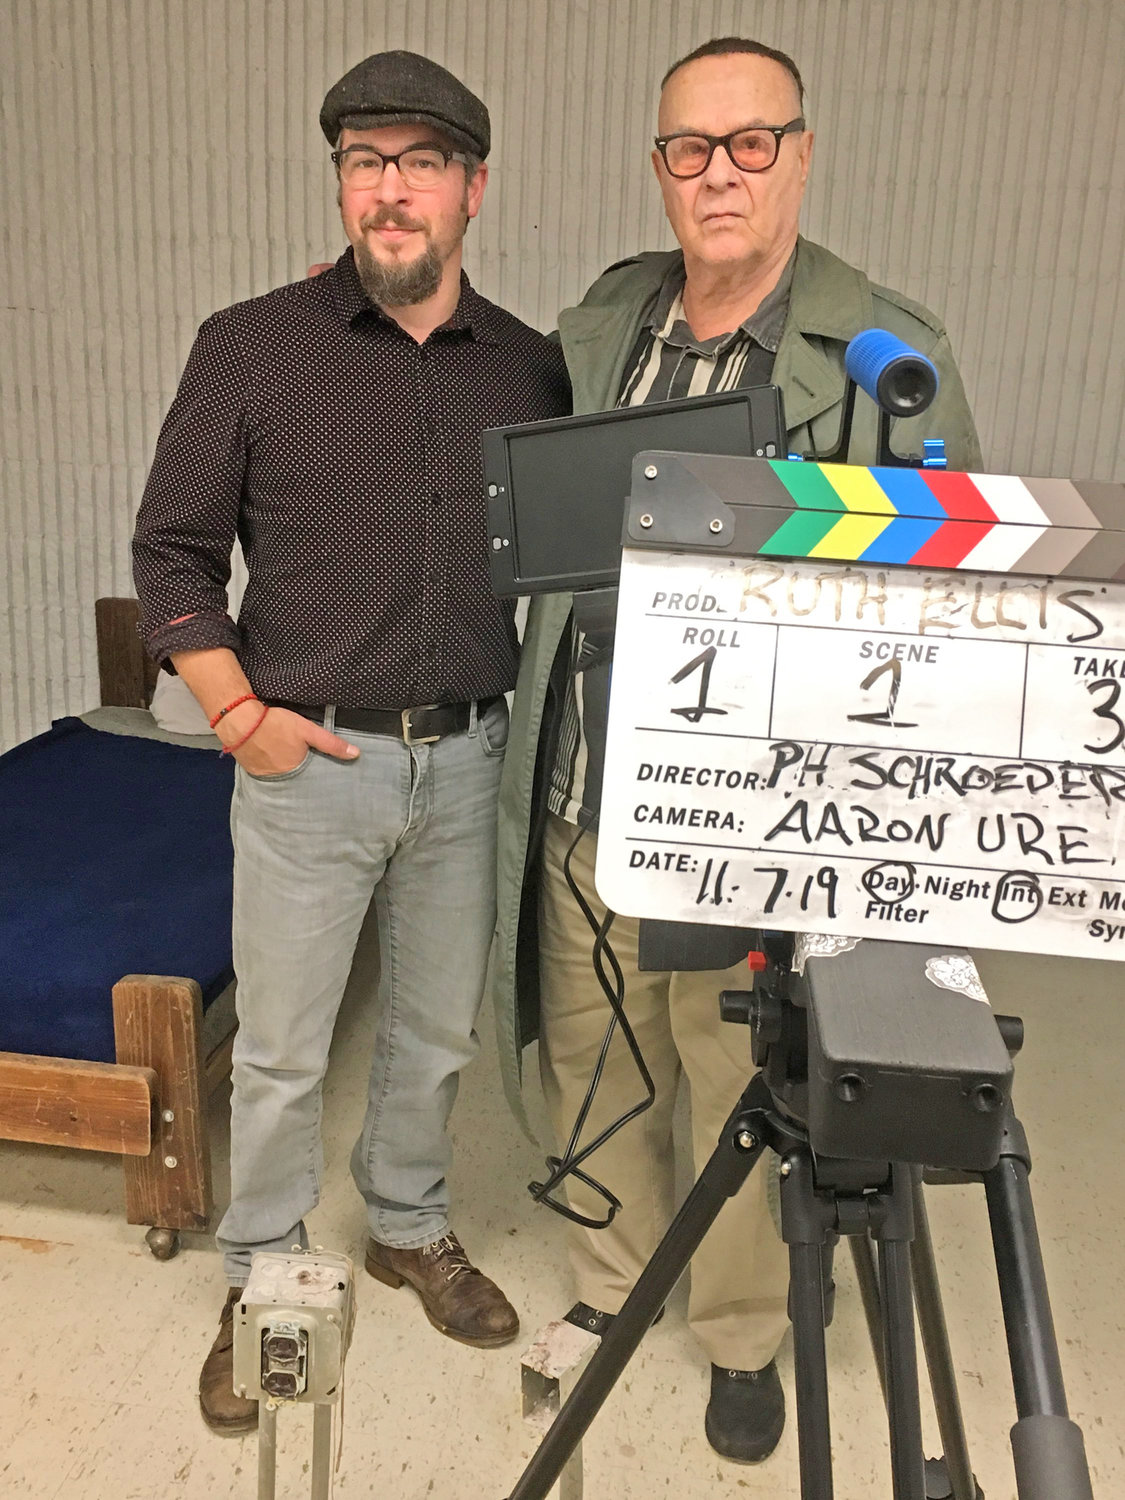 COLLABORATORS — Aaron Ure, videographer, and producer/director Peter-Henry Schroeder pose for a photo inside a room at Oneida Municipal Center they are using to shoot the feature film, “Ruth Ellis.”